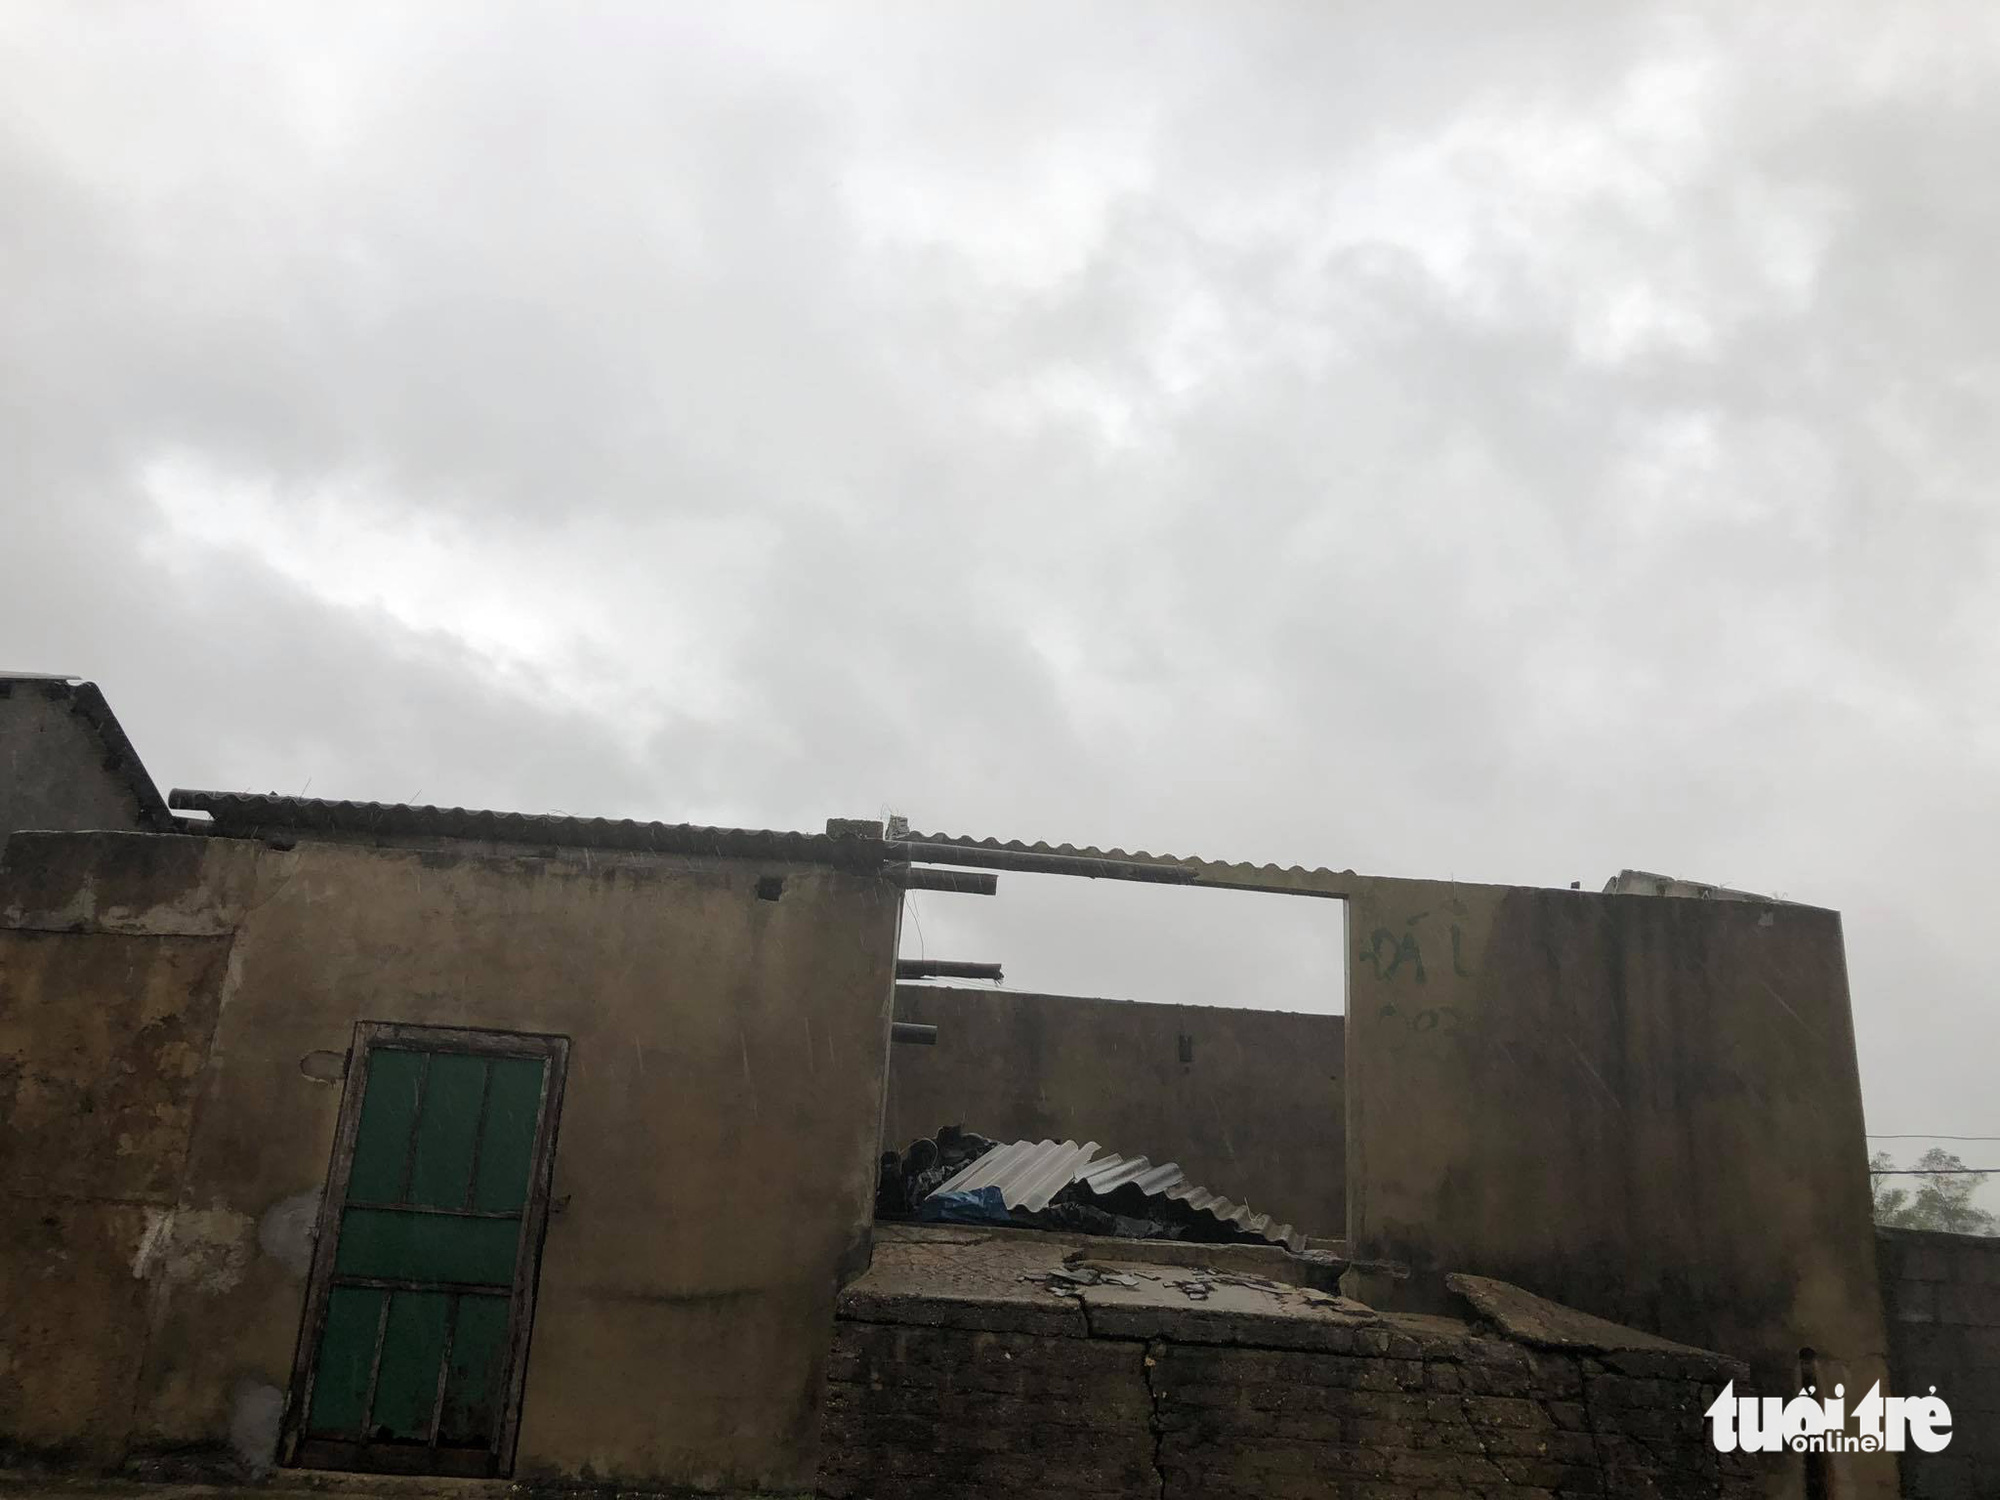 A house has its roof blown off in Quang Tri Province, Vietnam, November 15, 2020. Photo: Doan Cuong / Tuoi Tre